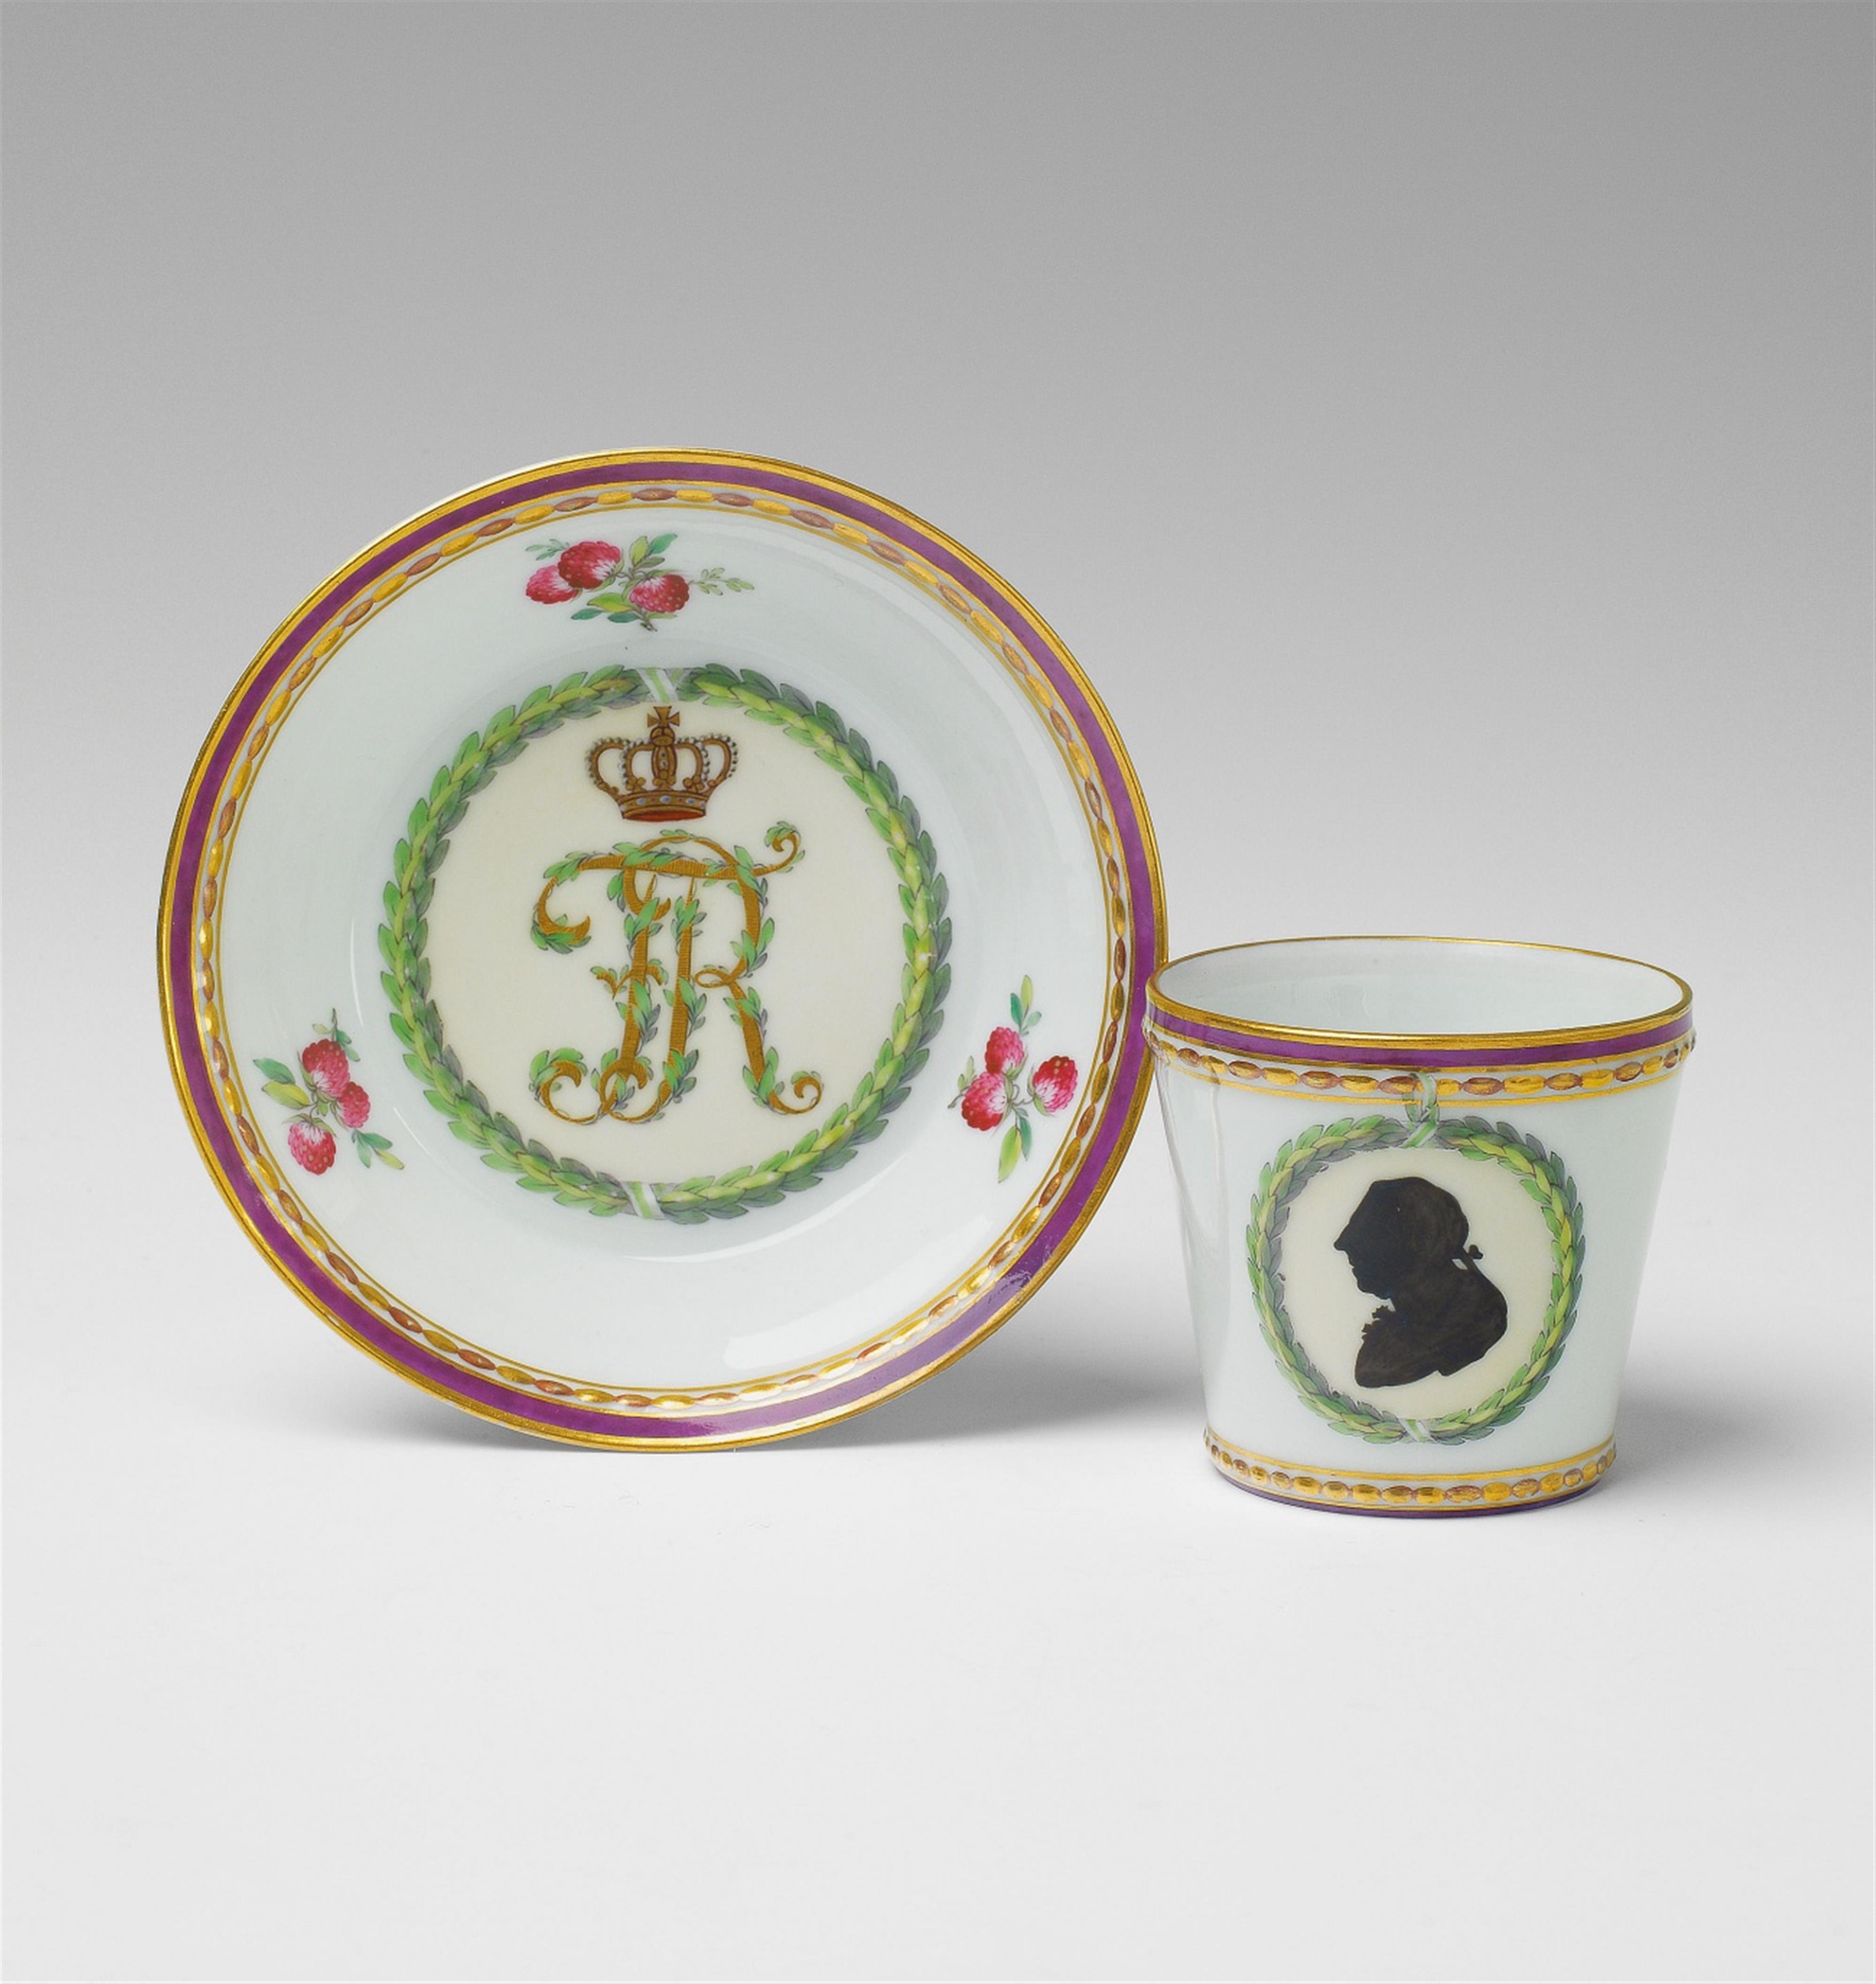 A Berin KPM porcelain cup and saucer with a silhouette portrait of Frederick II - image-1